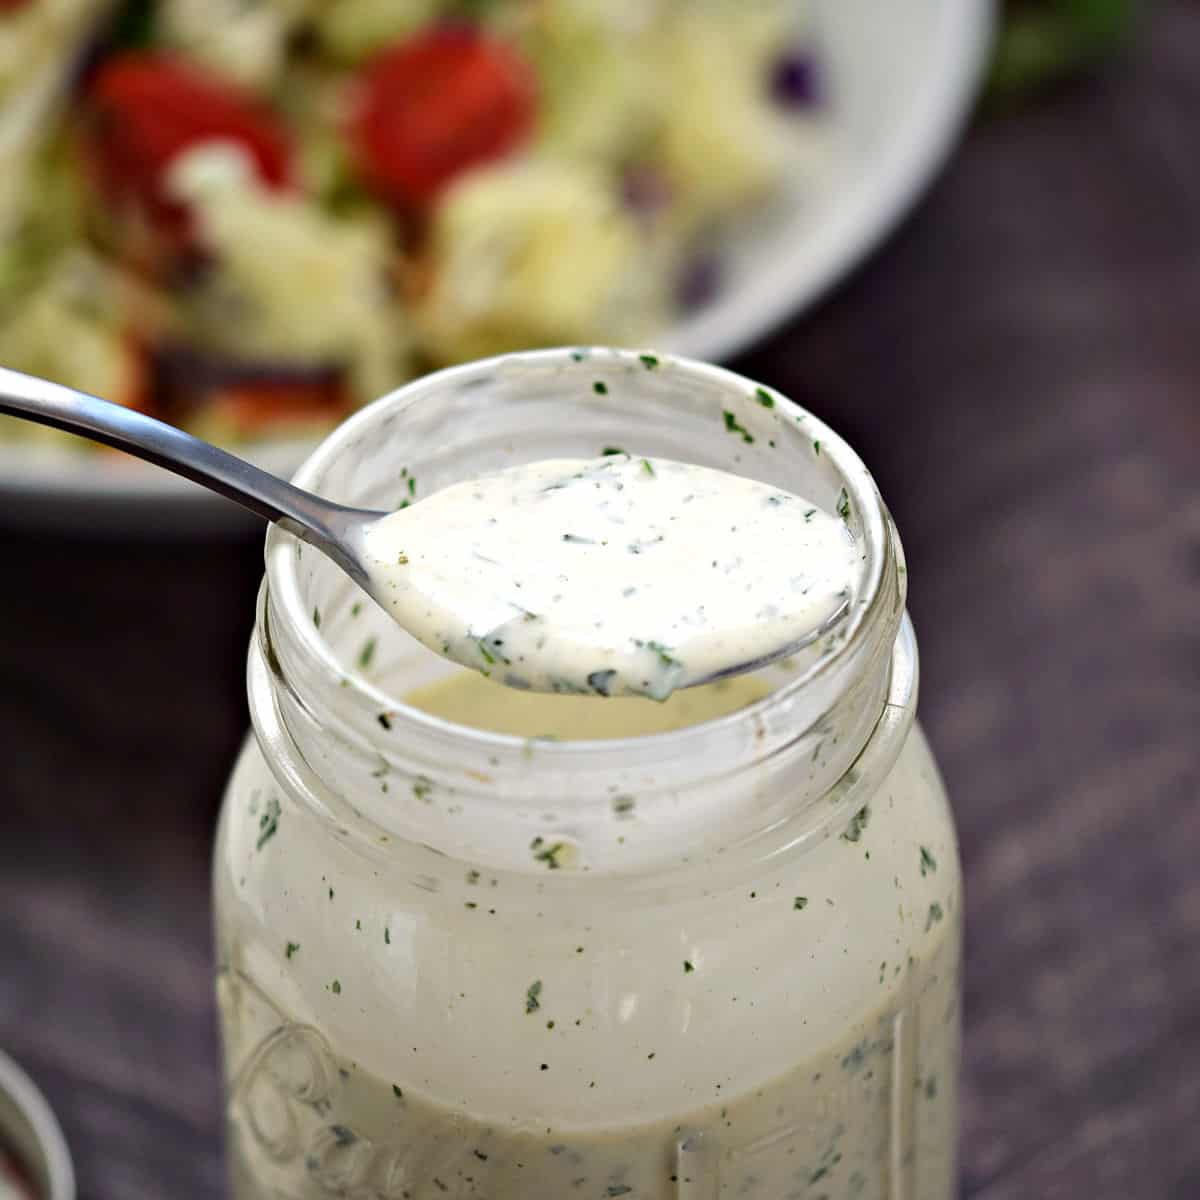 https://cookingwithcurls.com/wp-content/uploads/2017/01/Easy-homemade-whole30-ranch-dressing-5-cookingwithcurls.com_.jpg